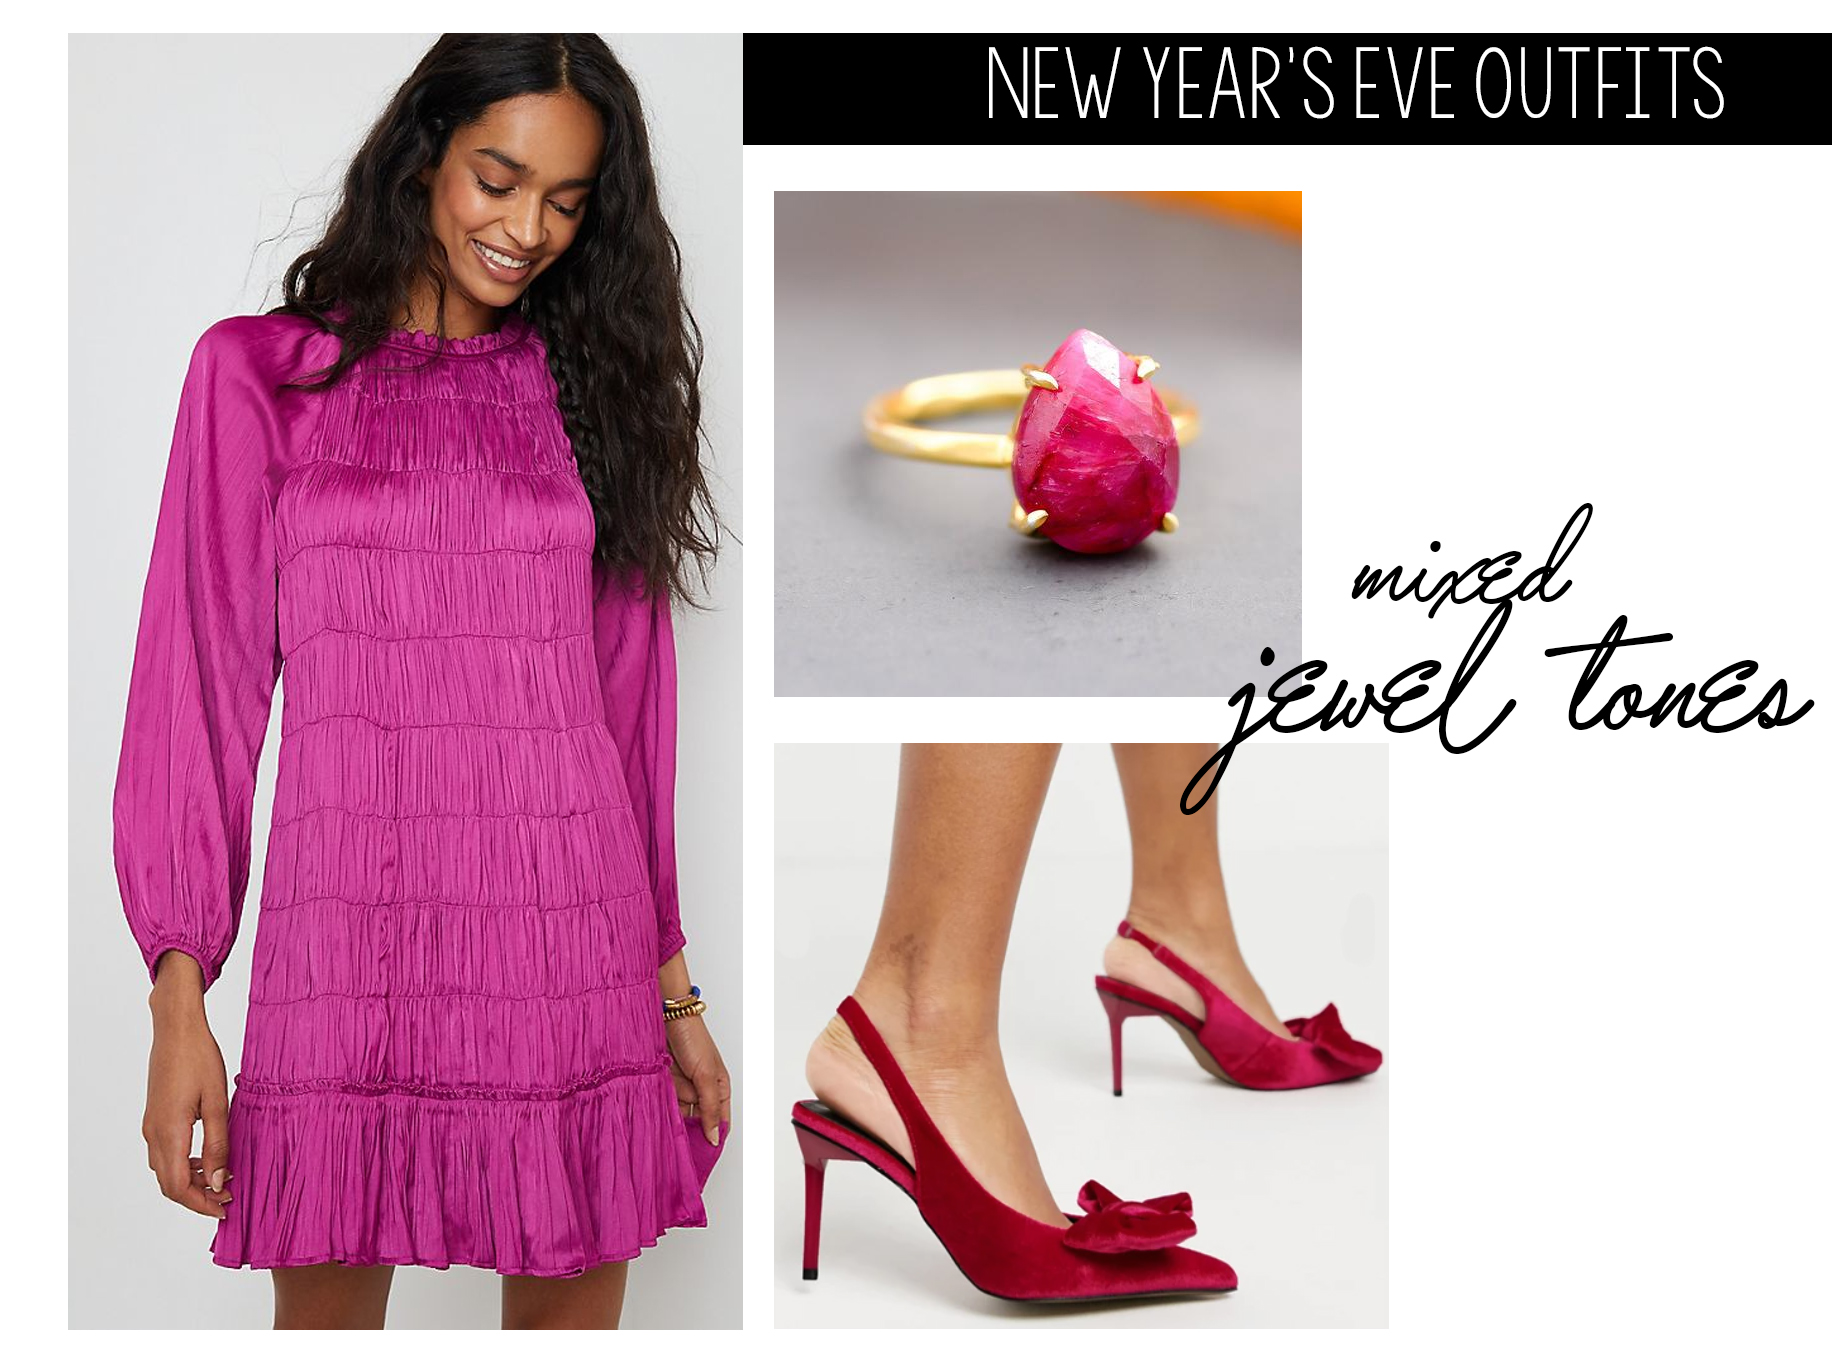 21 Timeless New Years Eve Outfit Ideas - The Pearl Source